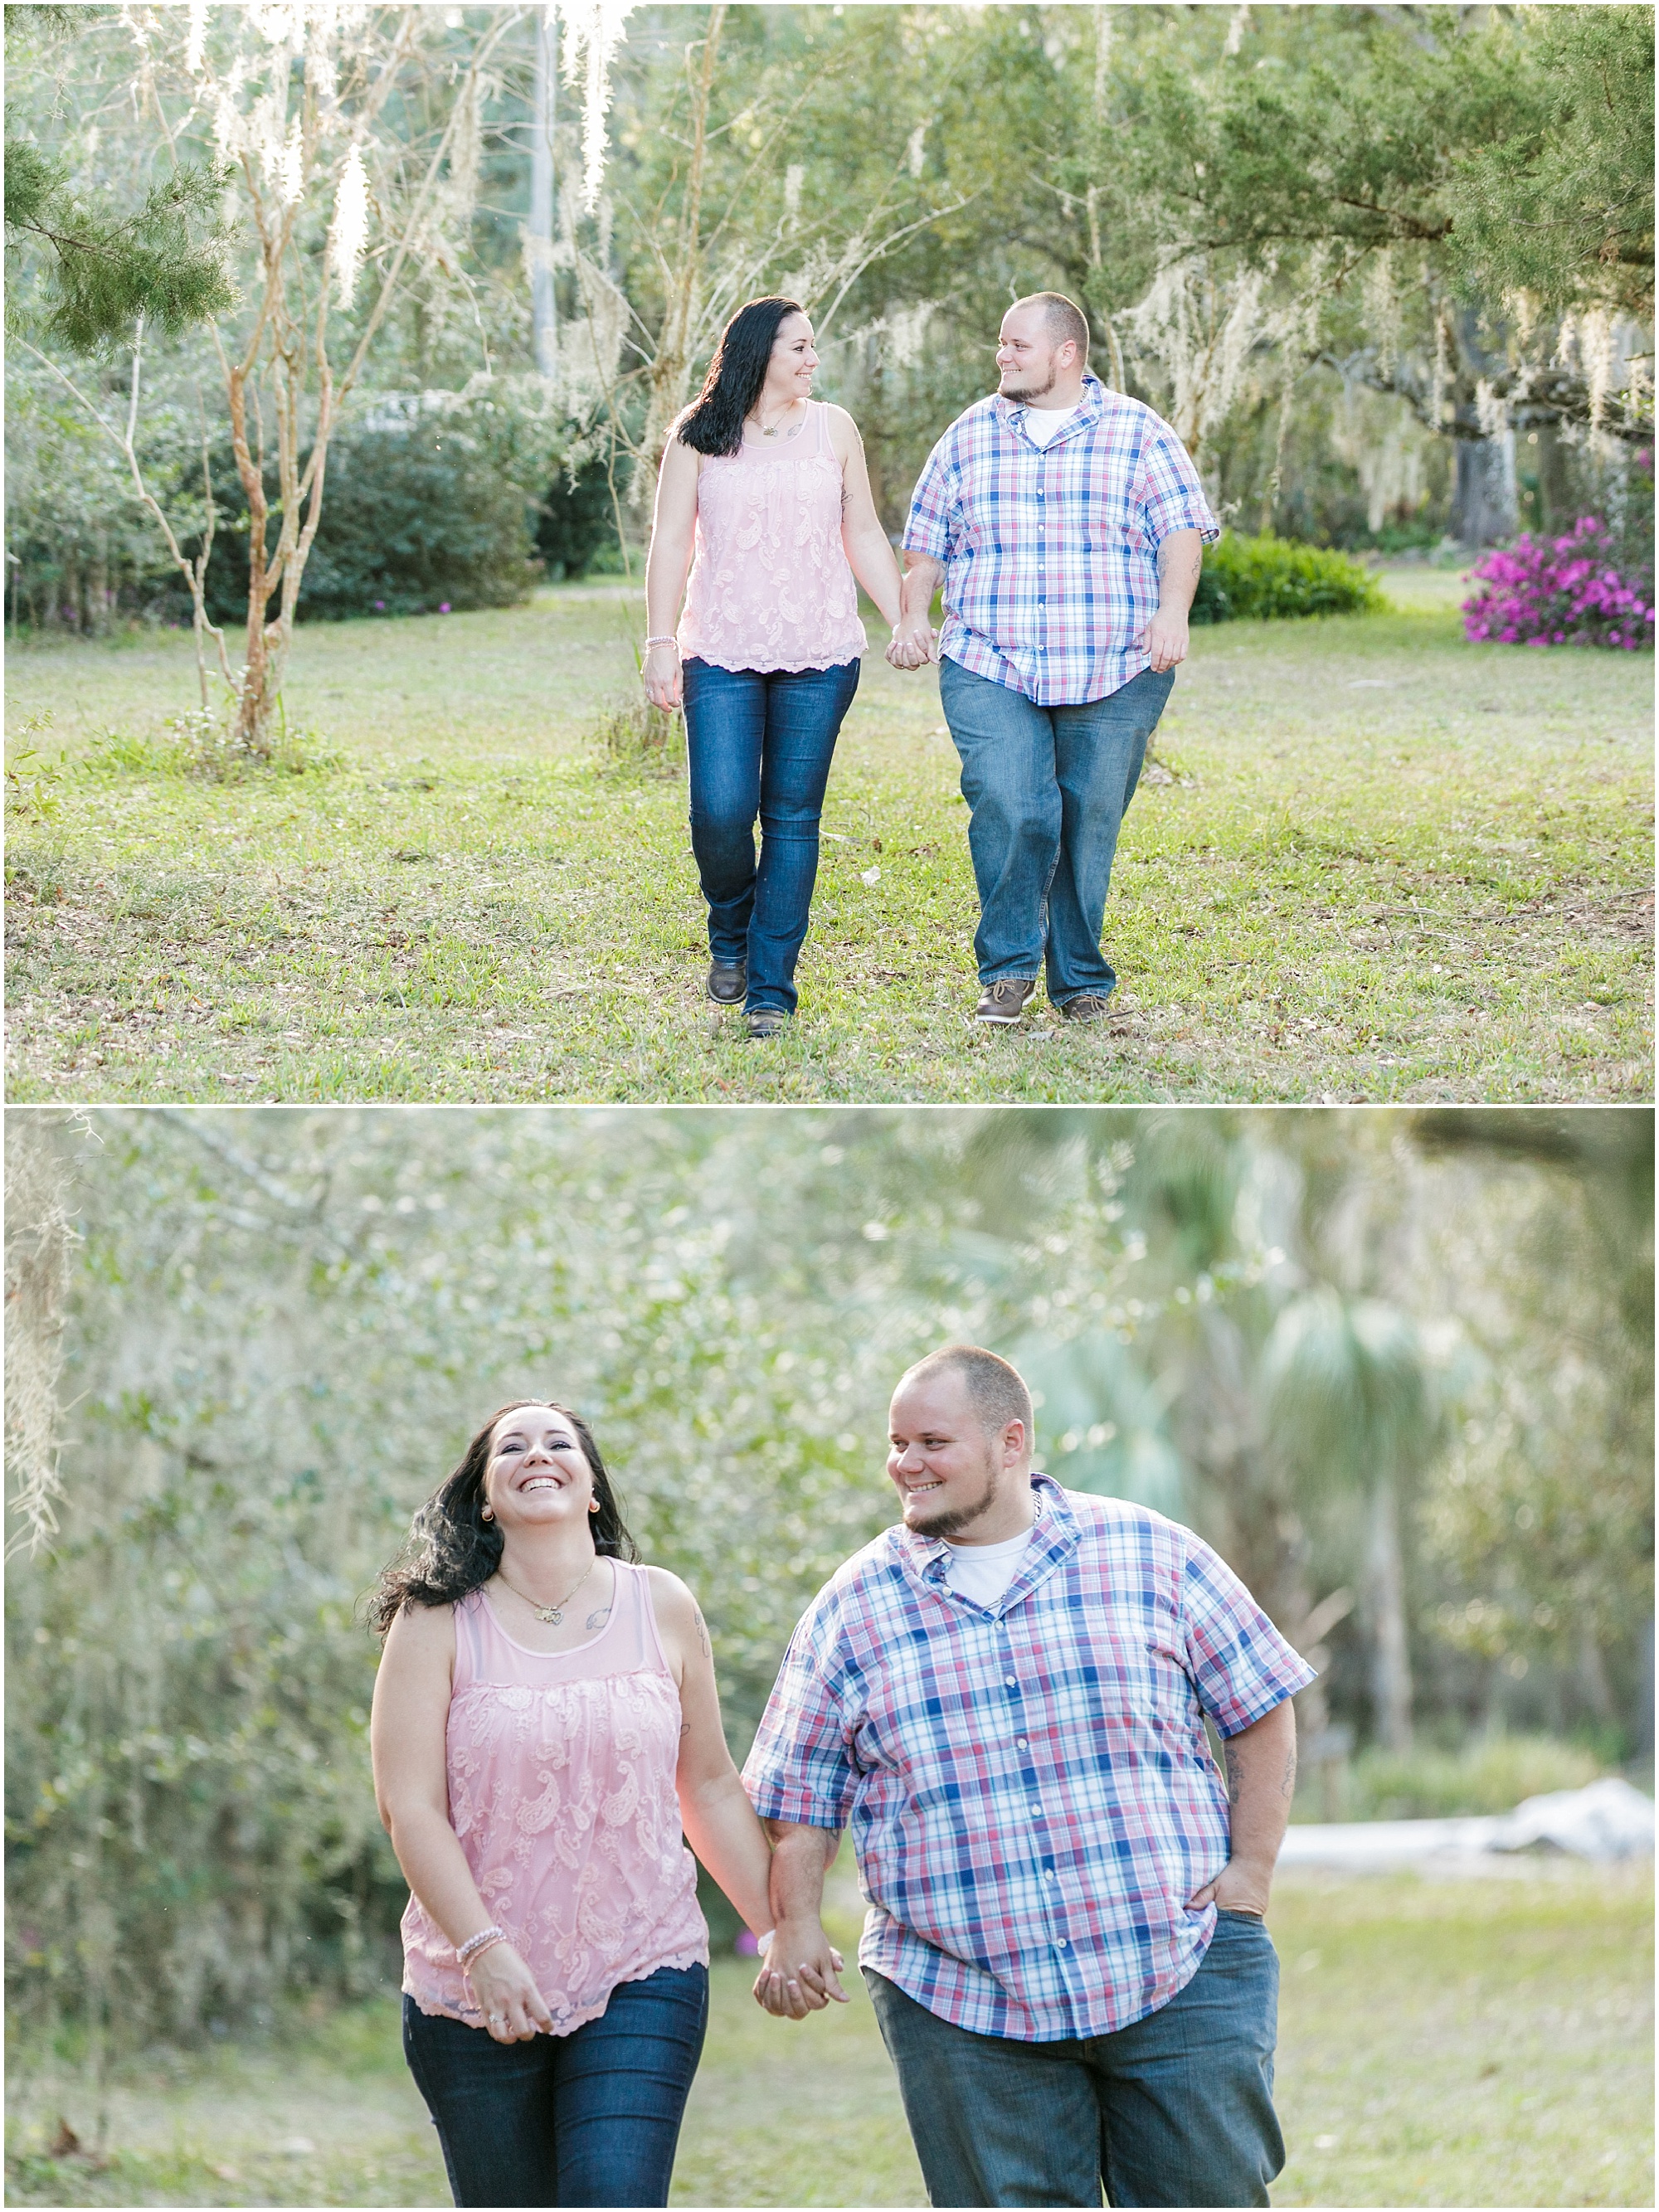 Couple hold hands and laughing while walking in a park.